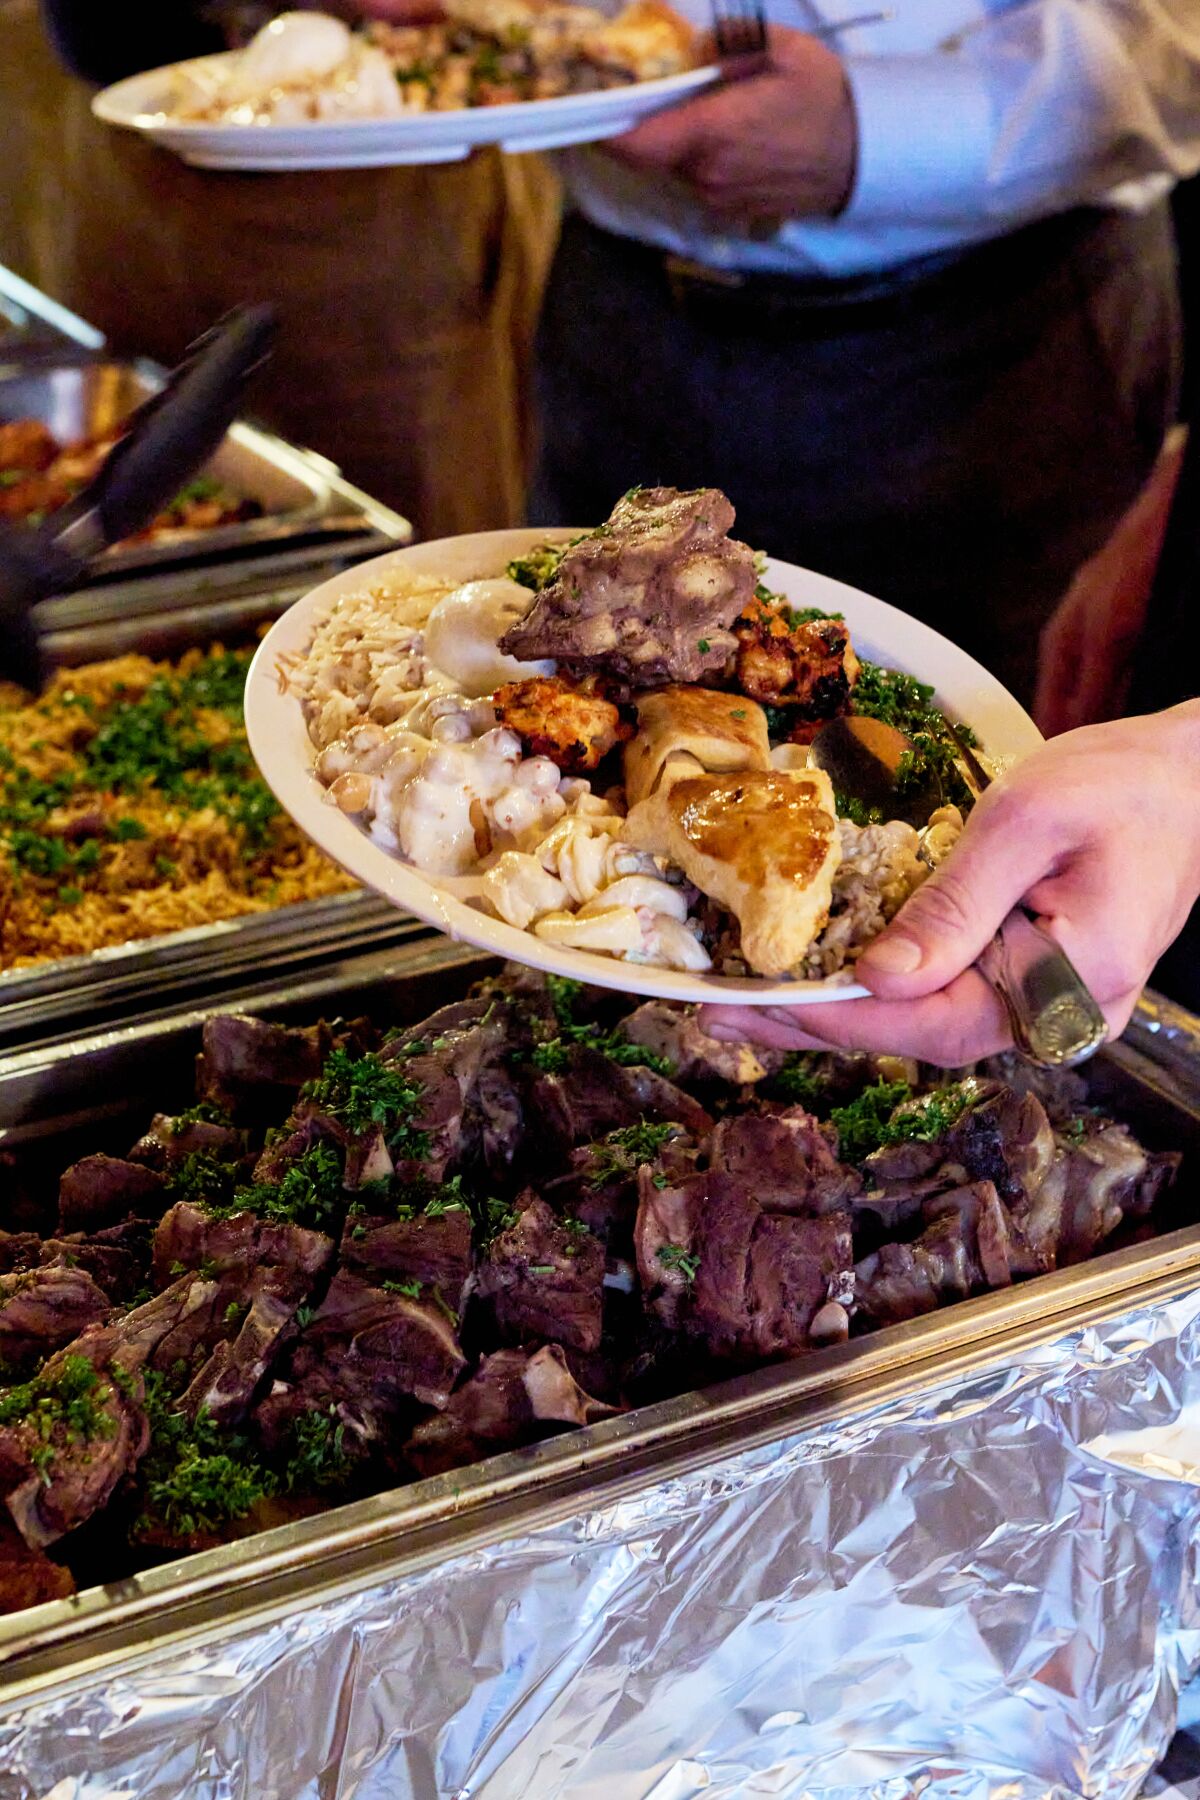 Diners break fast with an iftar buffet at Aleppo's Kitchen.